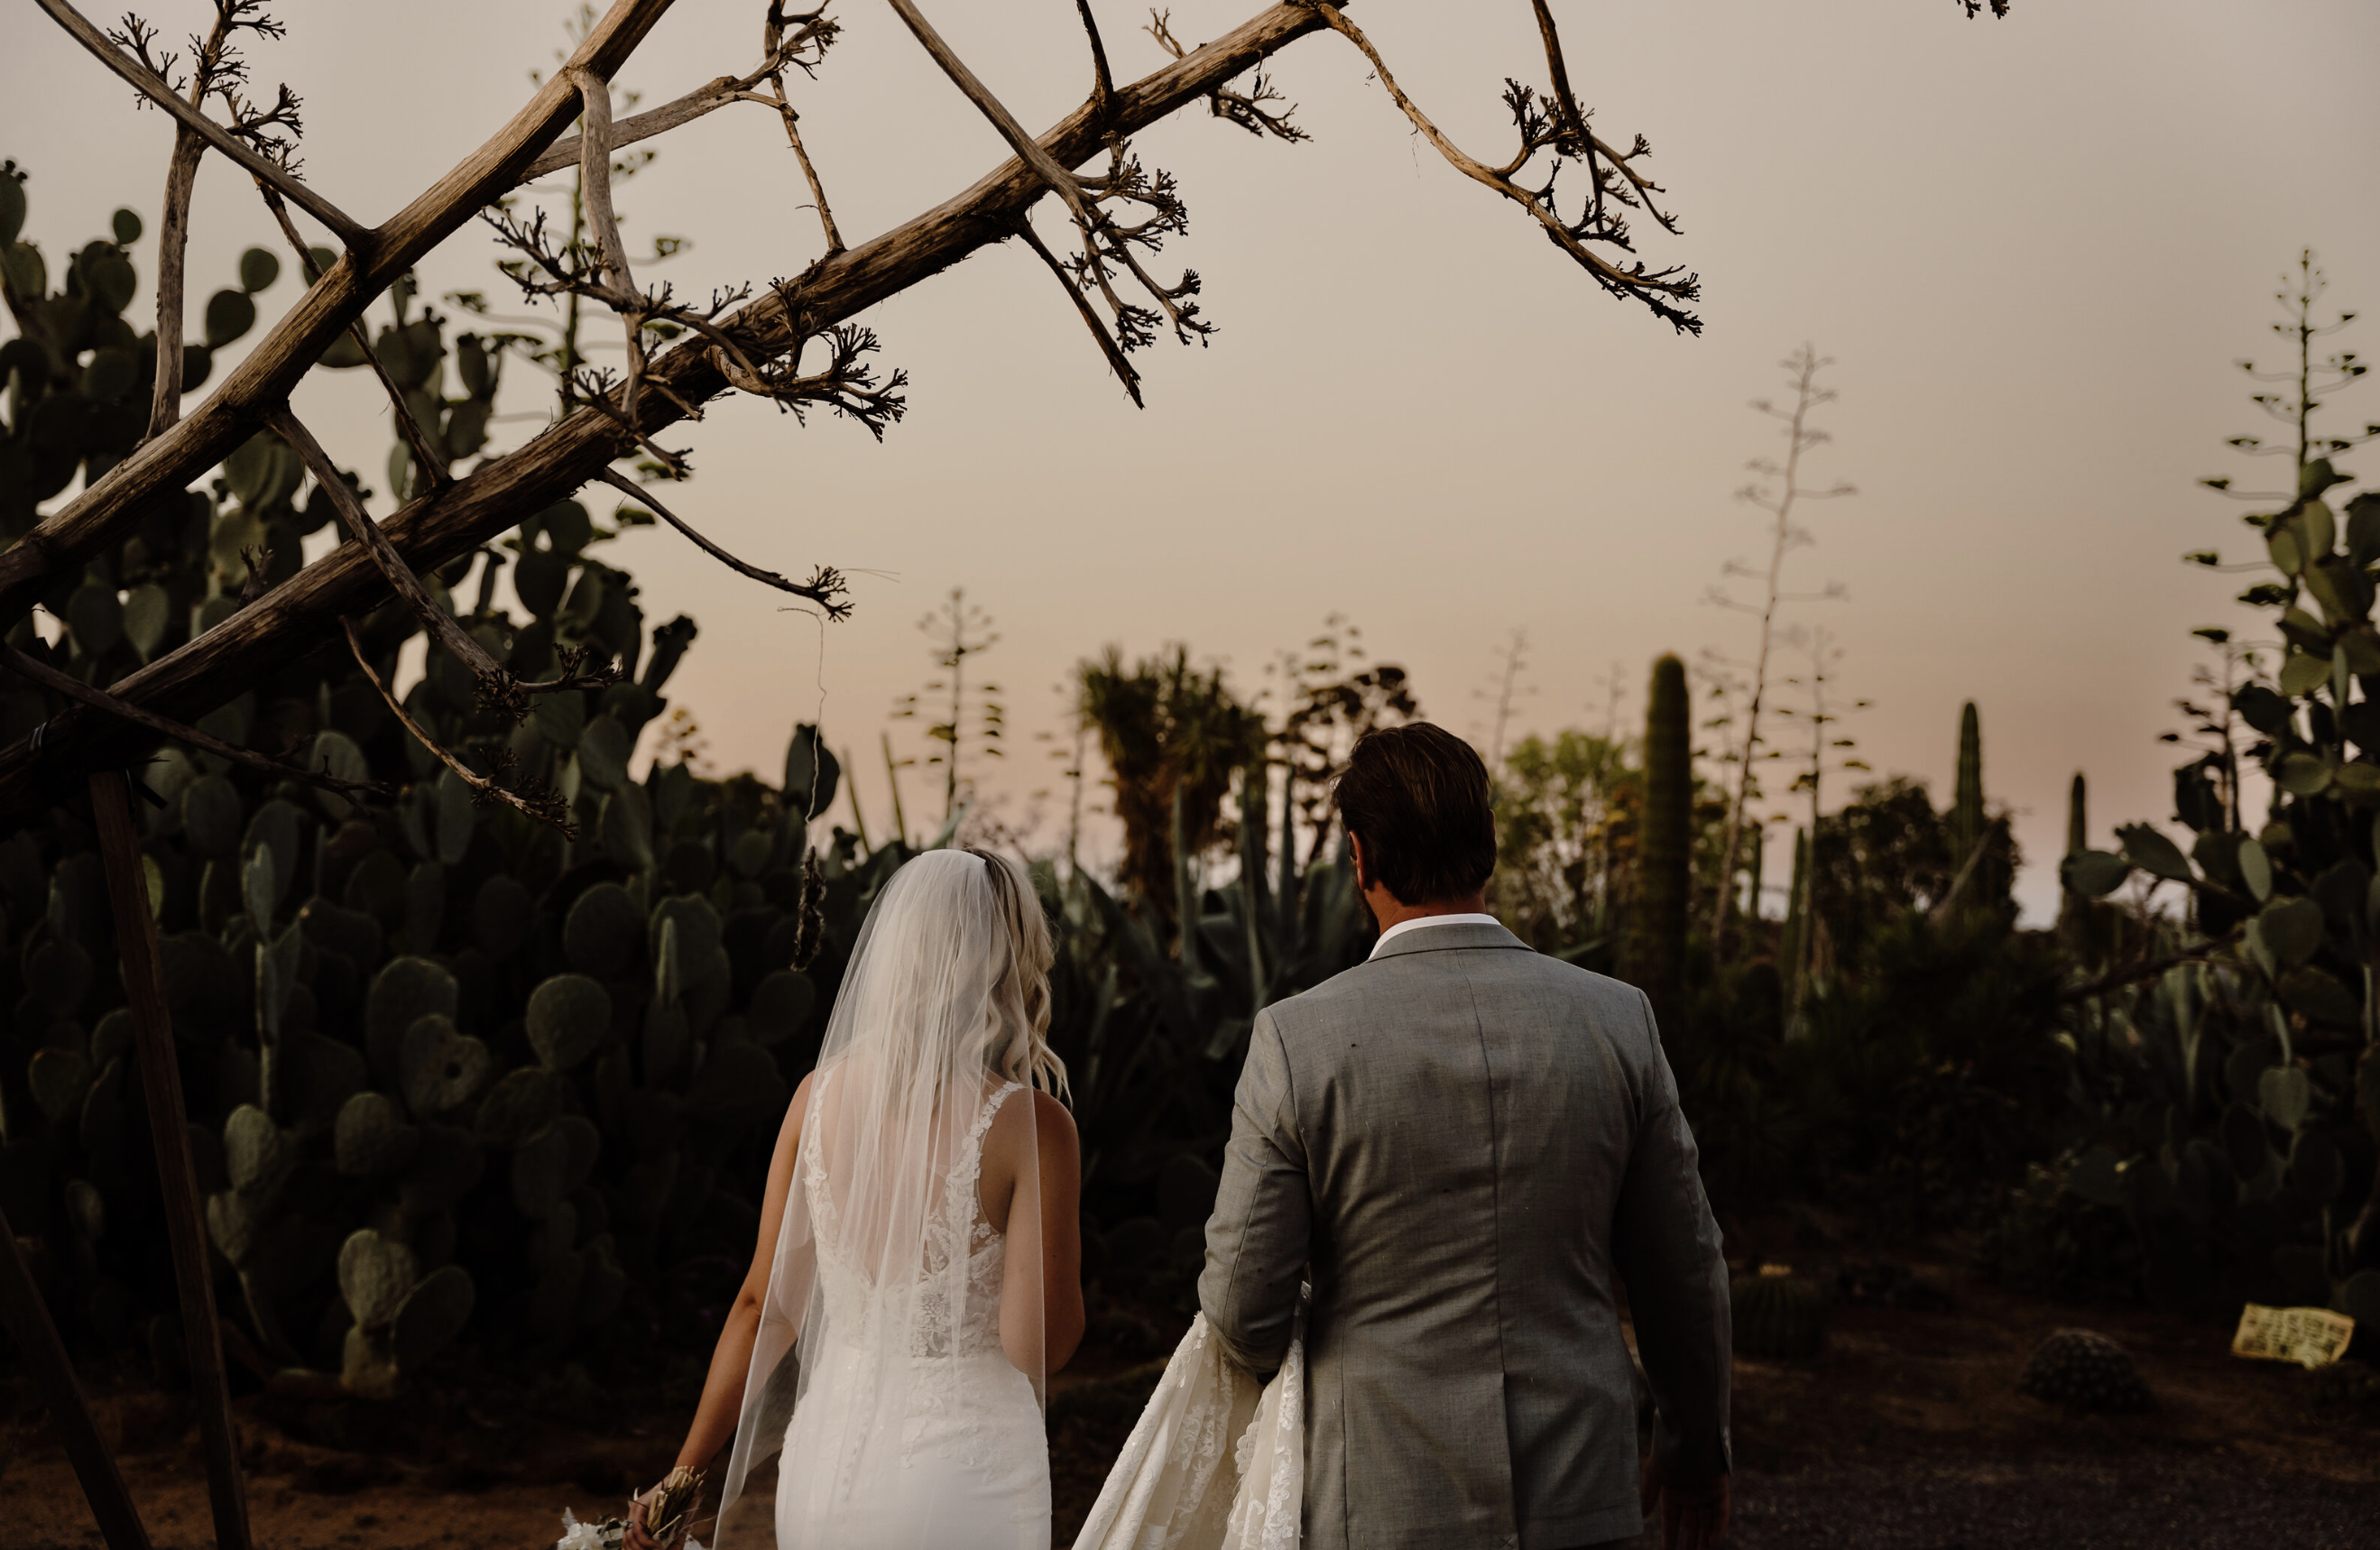 Wedding day timeline, how to plan your wedding day - image of eden and Jack on their elopement day at Cactus Country, Victoria